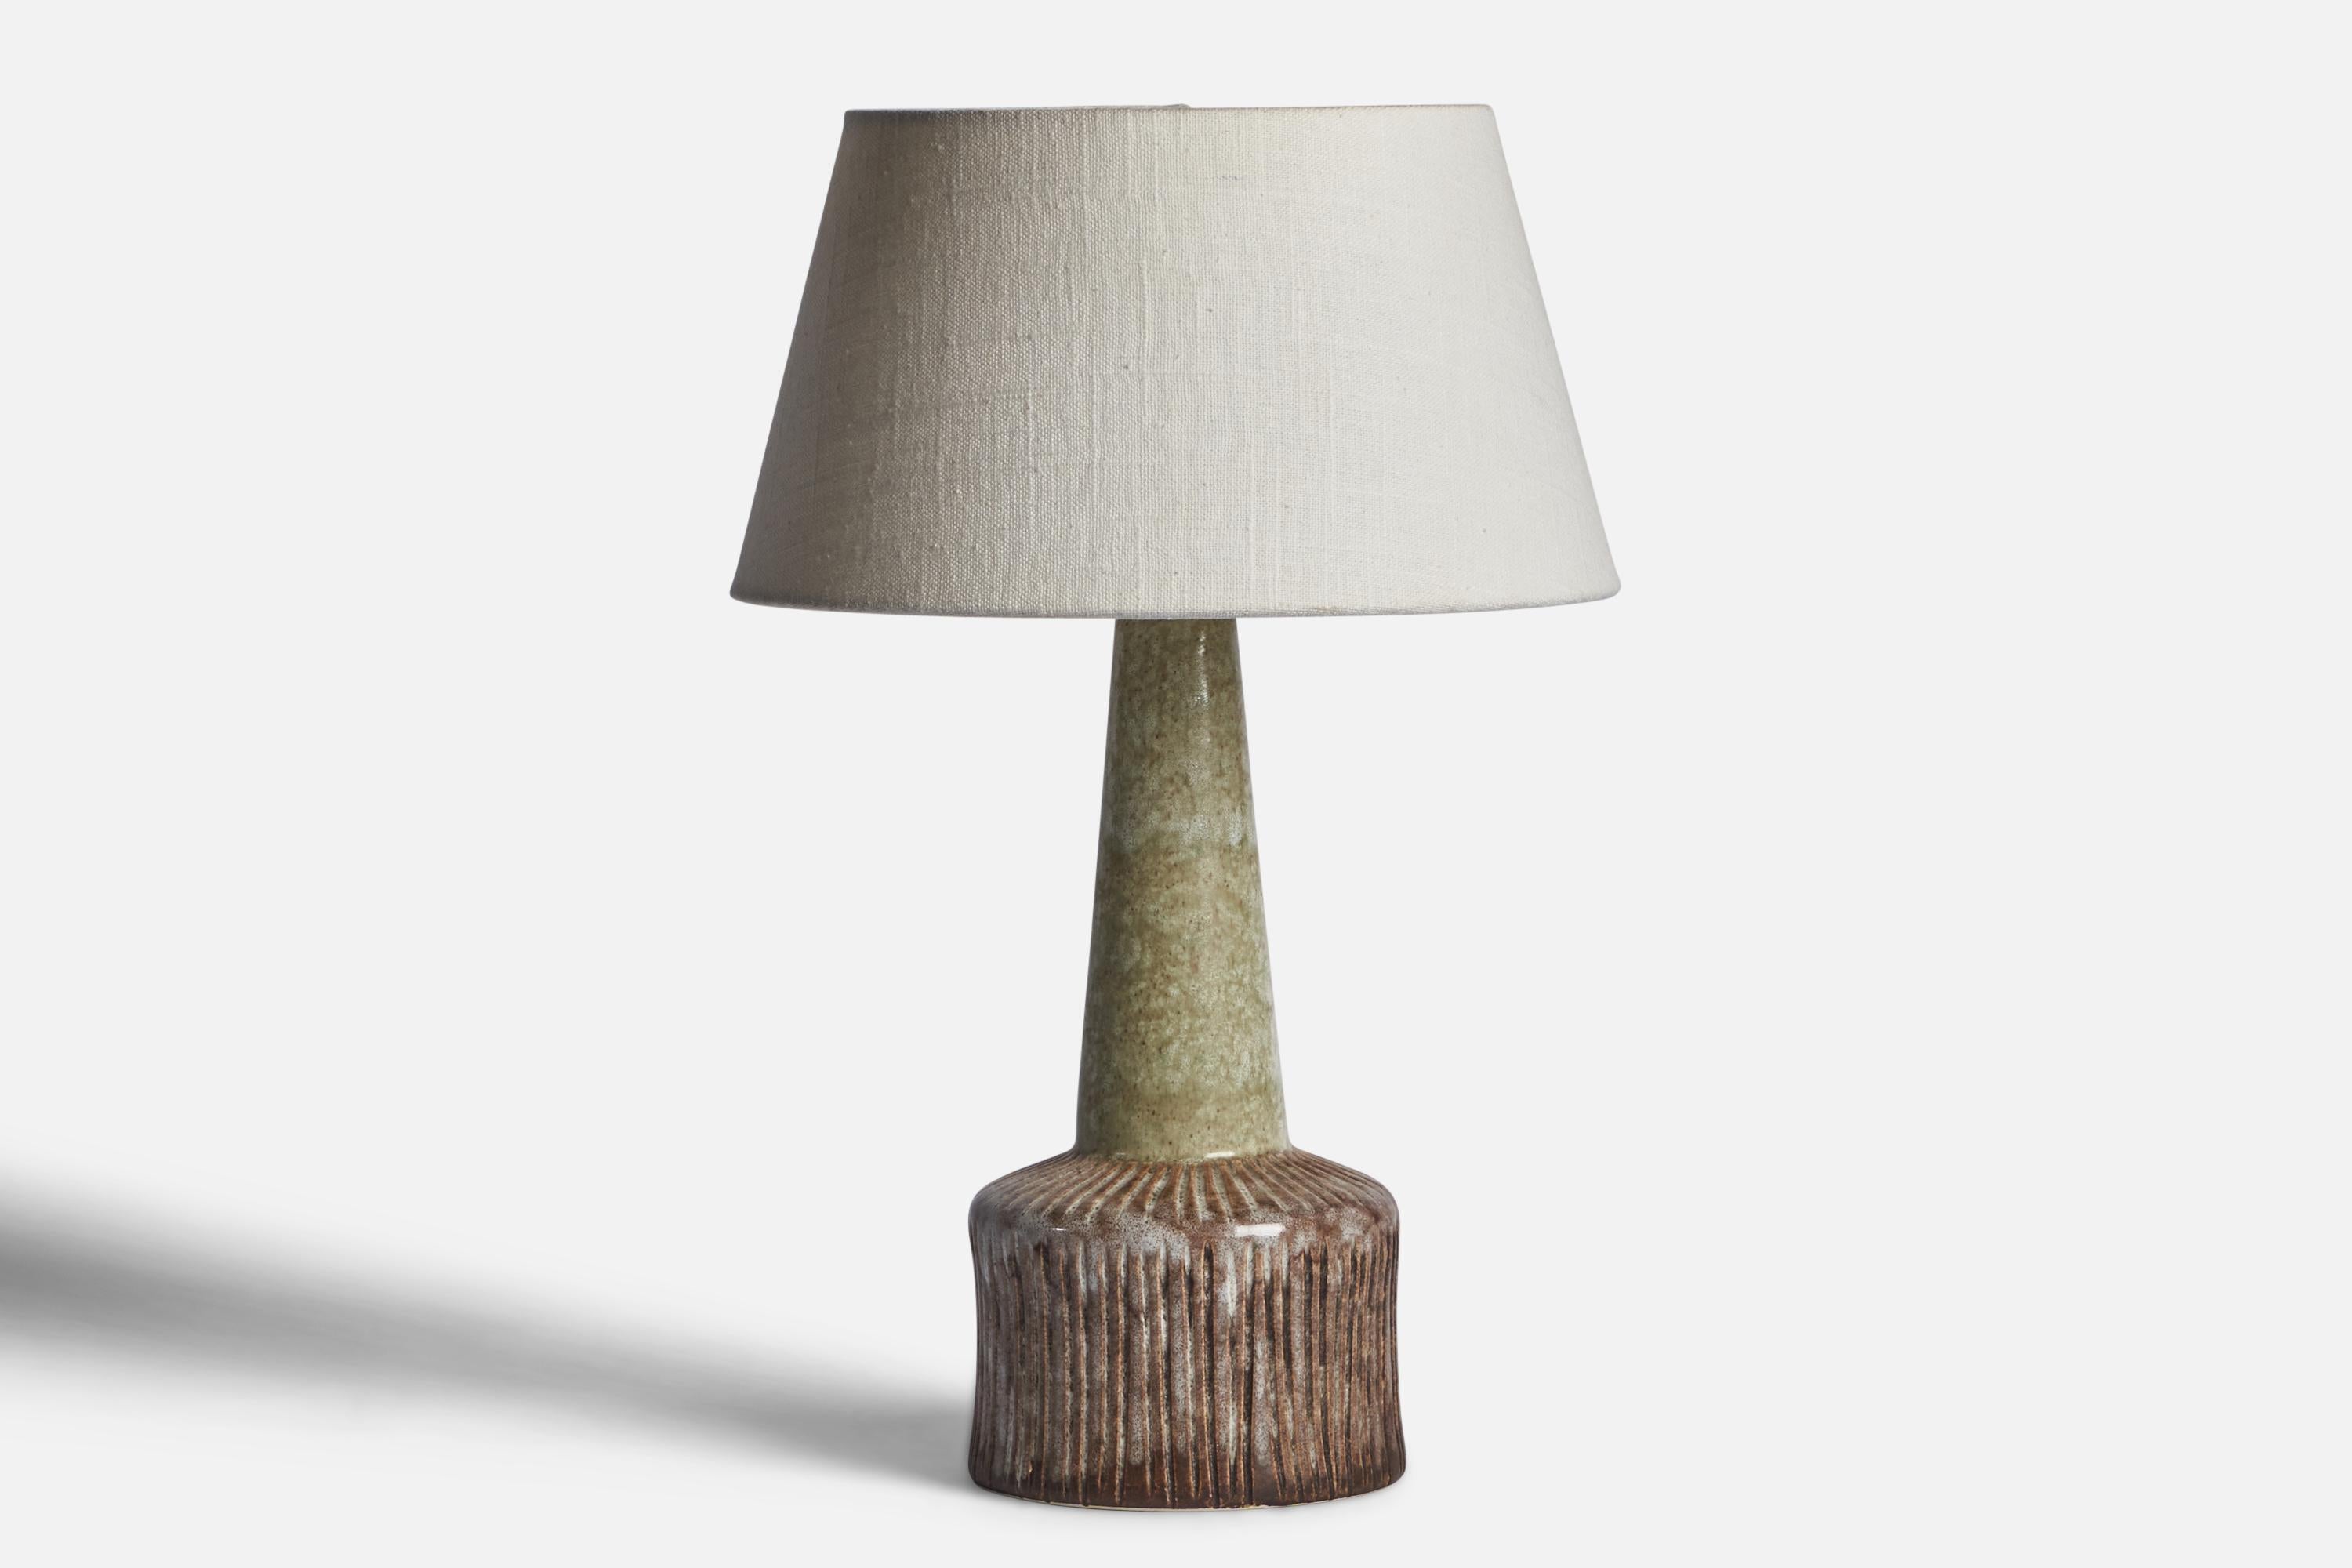 A brown and green-glazed stoneware table lamp designed and produced in Denmark, c. 1960s.

Dimensions of Lamp (inches): 12.45” H x 4.85” Diameter
Dimensions of Shade (inches): 7” Top Diameter x 10” Bottom Diameter x 5.5” H 
Dimensions of Lamp with